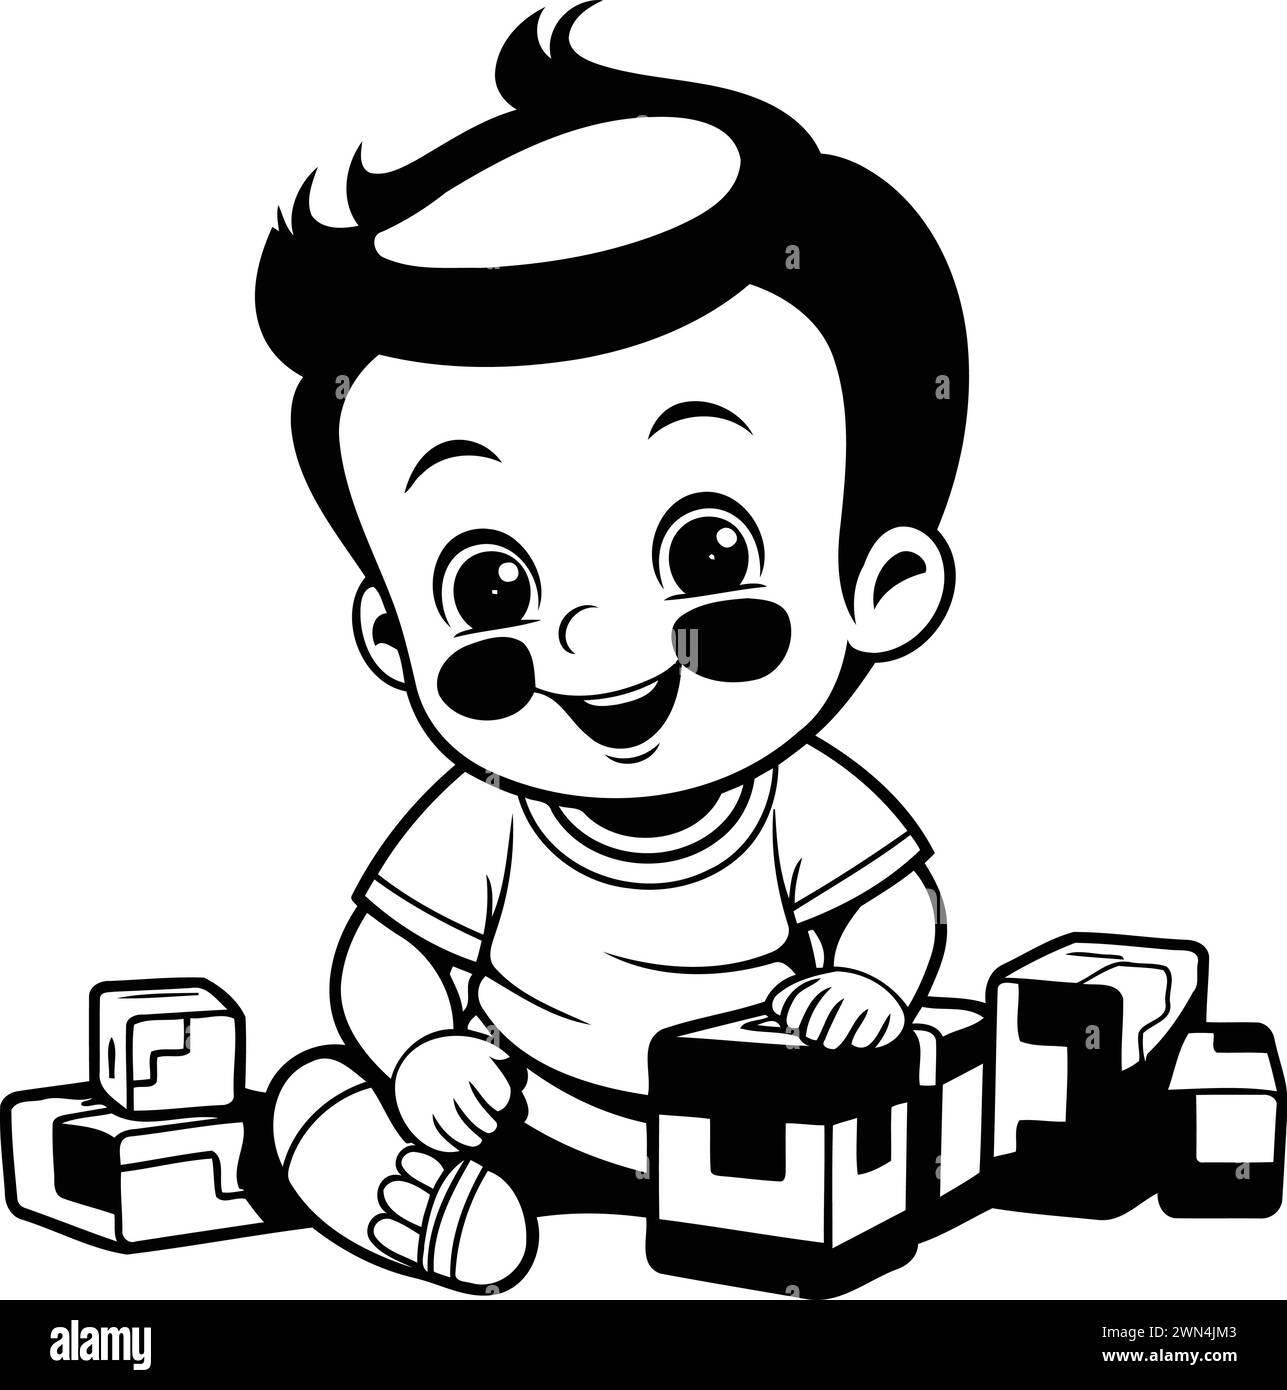 Cute Baby Boy Playing with Toy Blocks - Black and White Cartoon ...